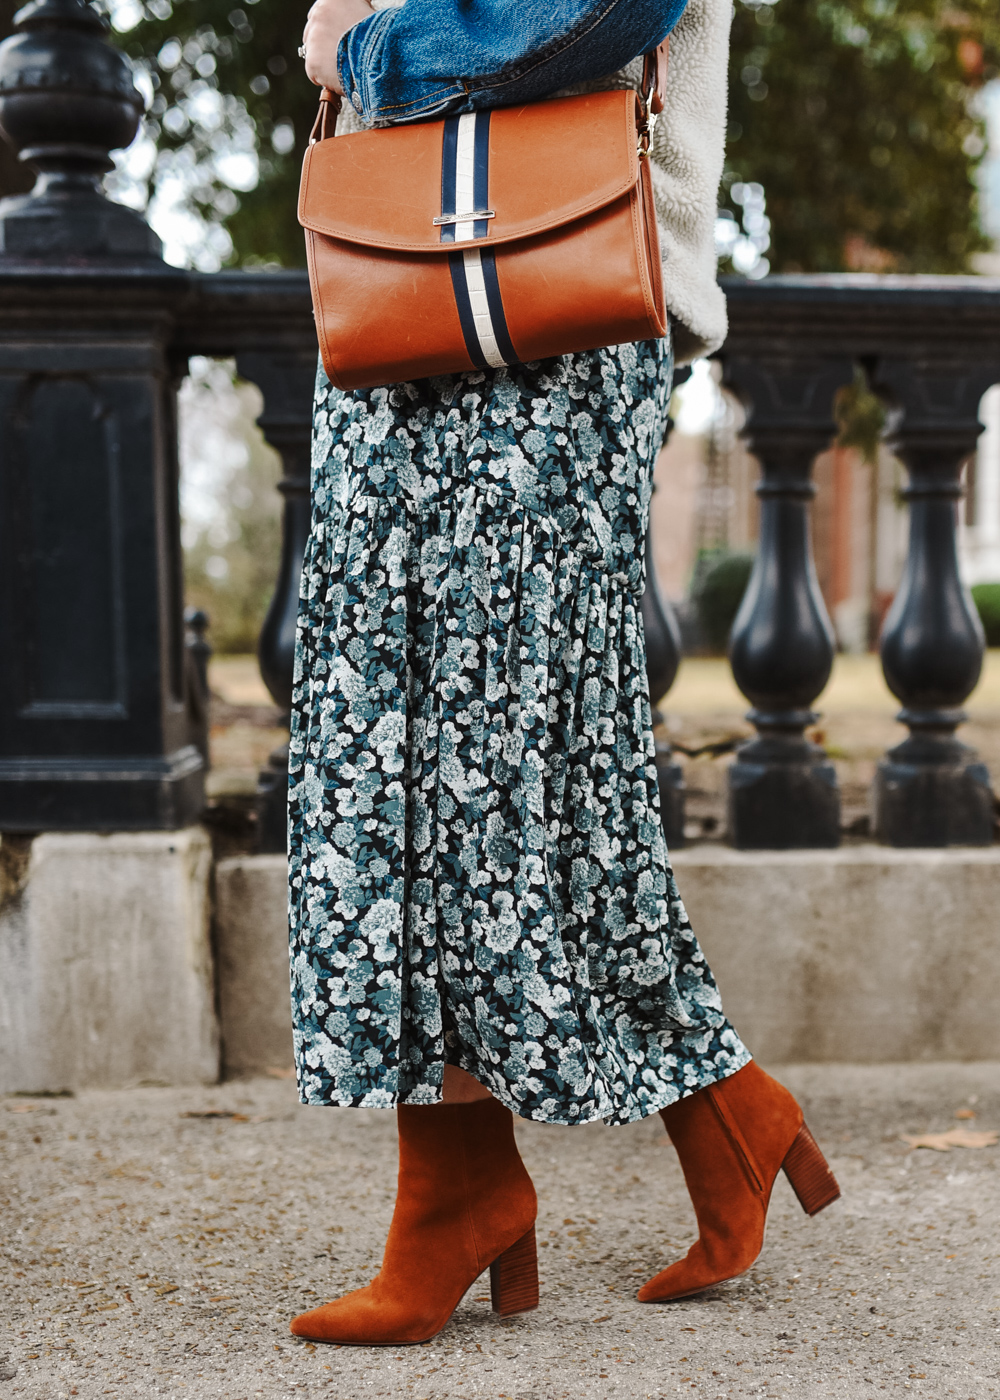 marc fisher suede booties, brahmin striped bag, free people green floral dress